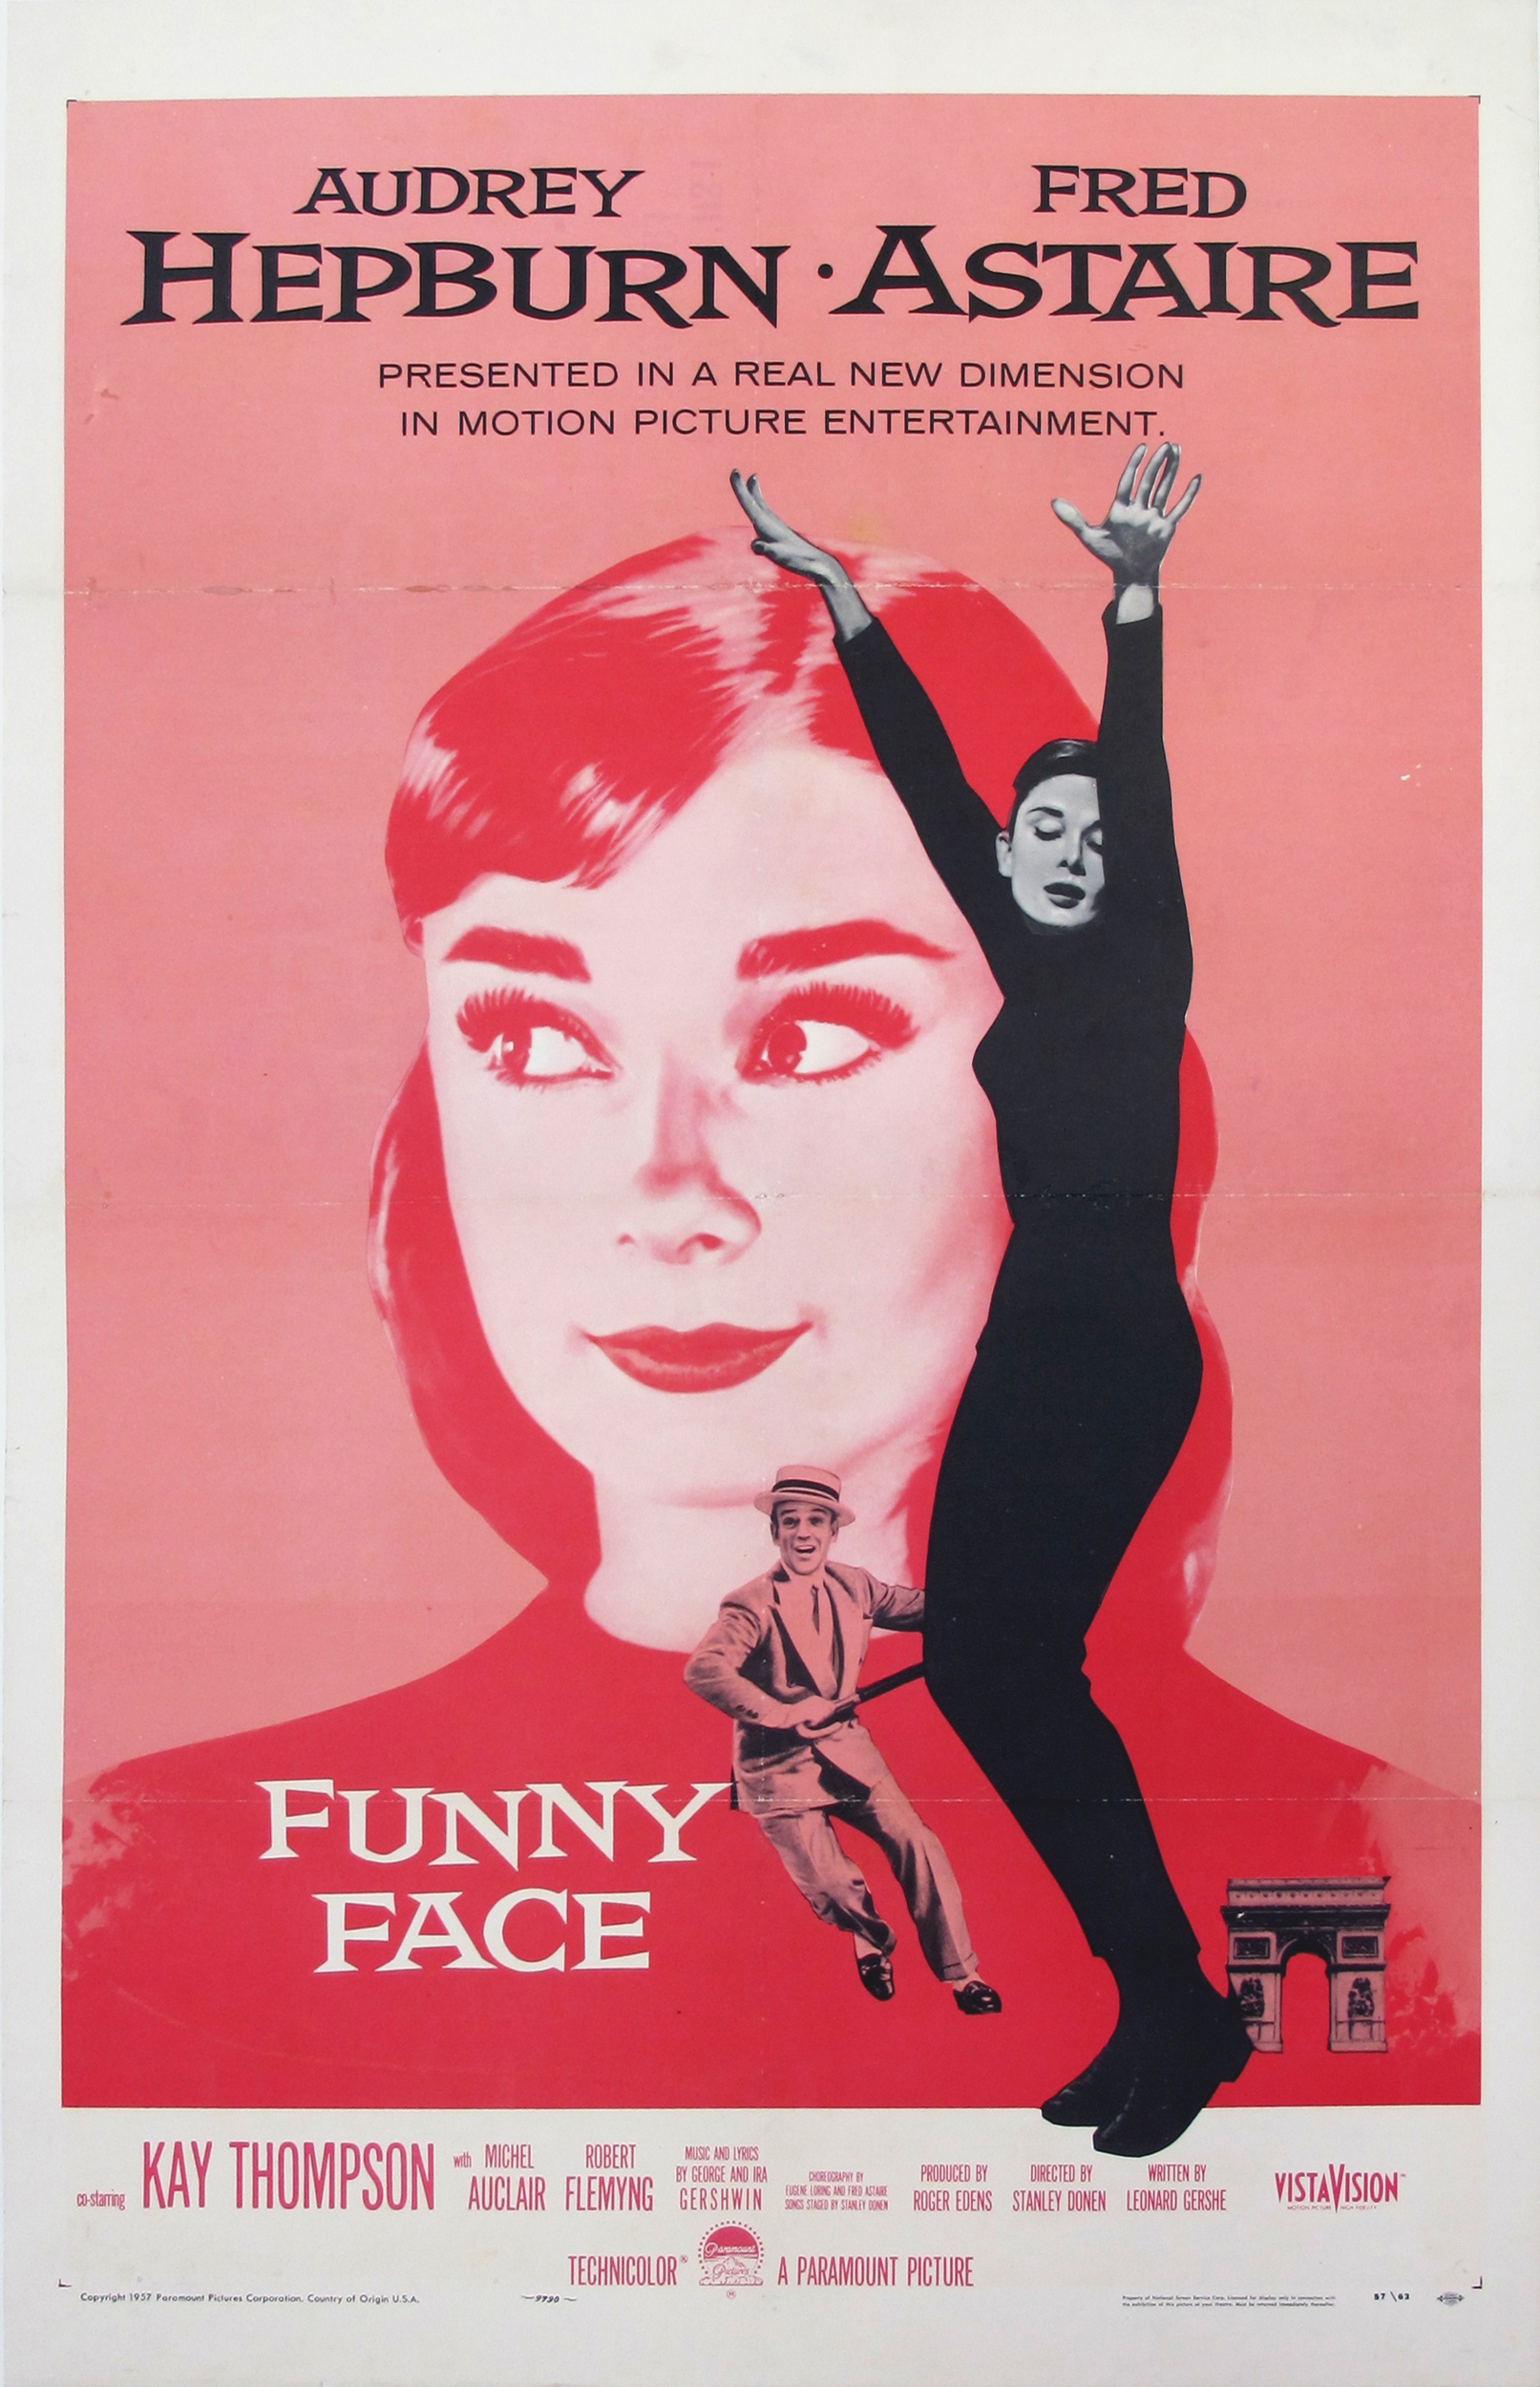 A film poster from when Audrey Hepburn starred in Funny Face in 1957.